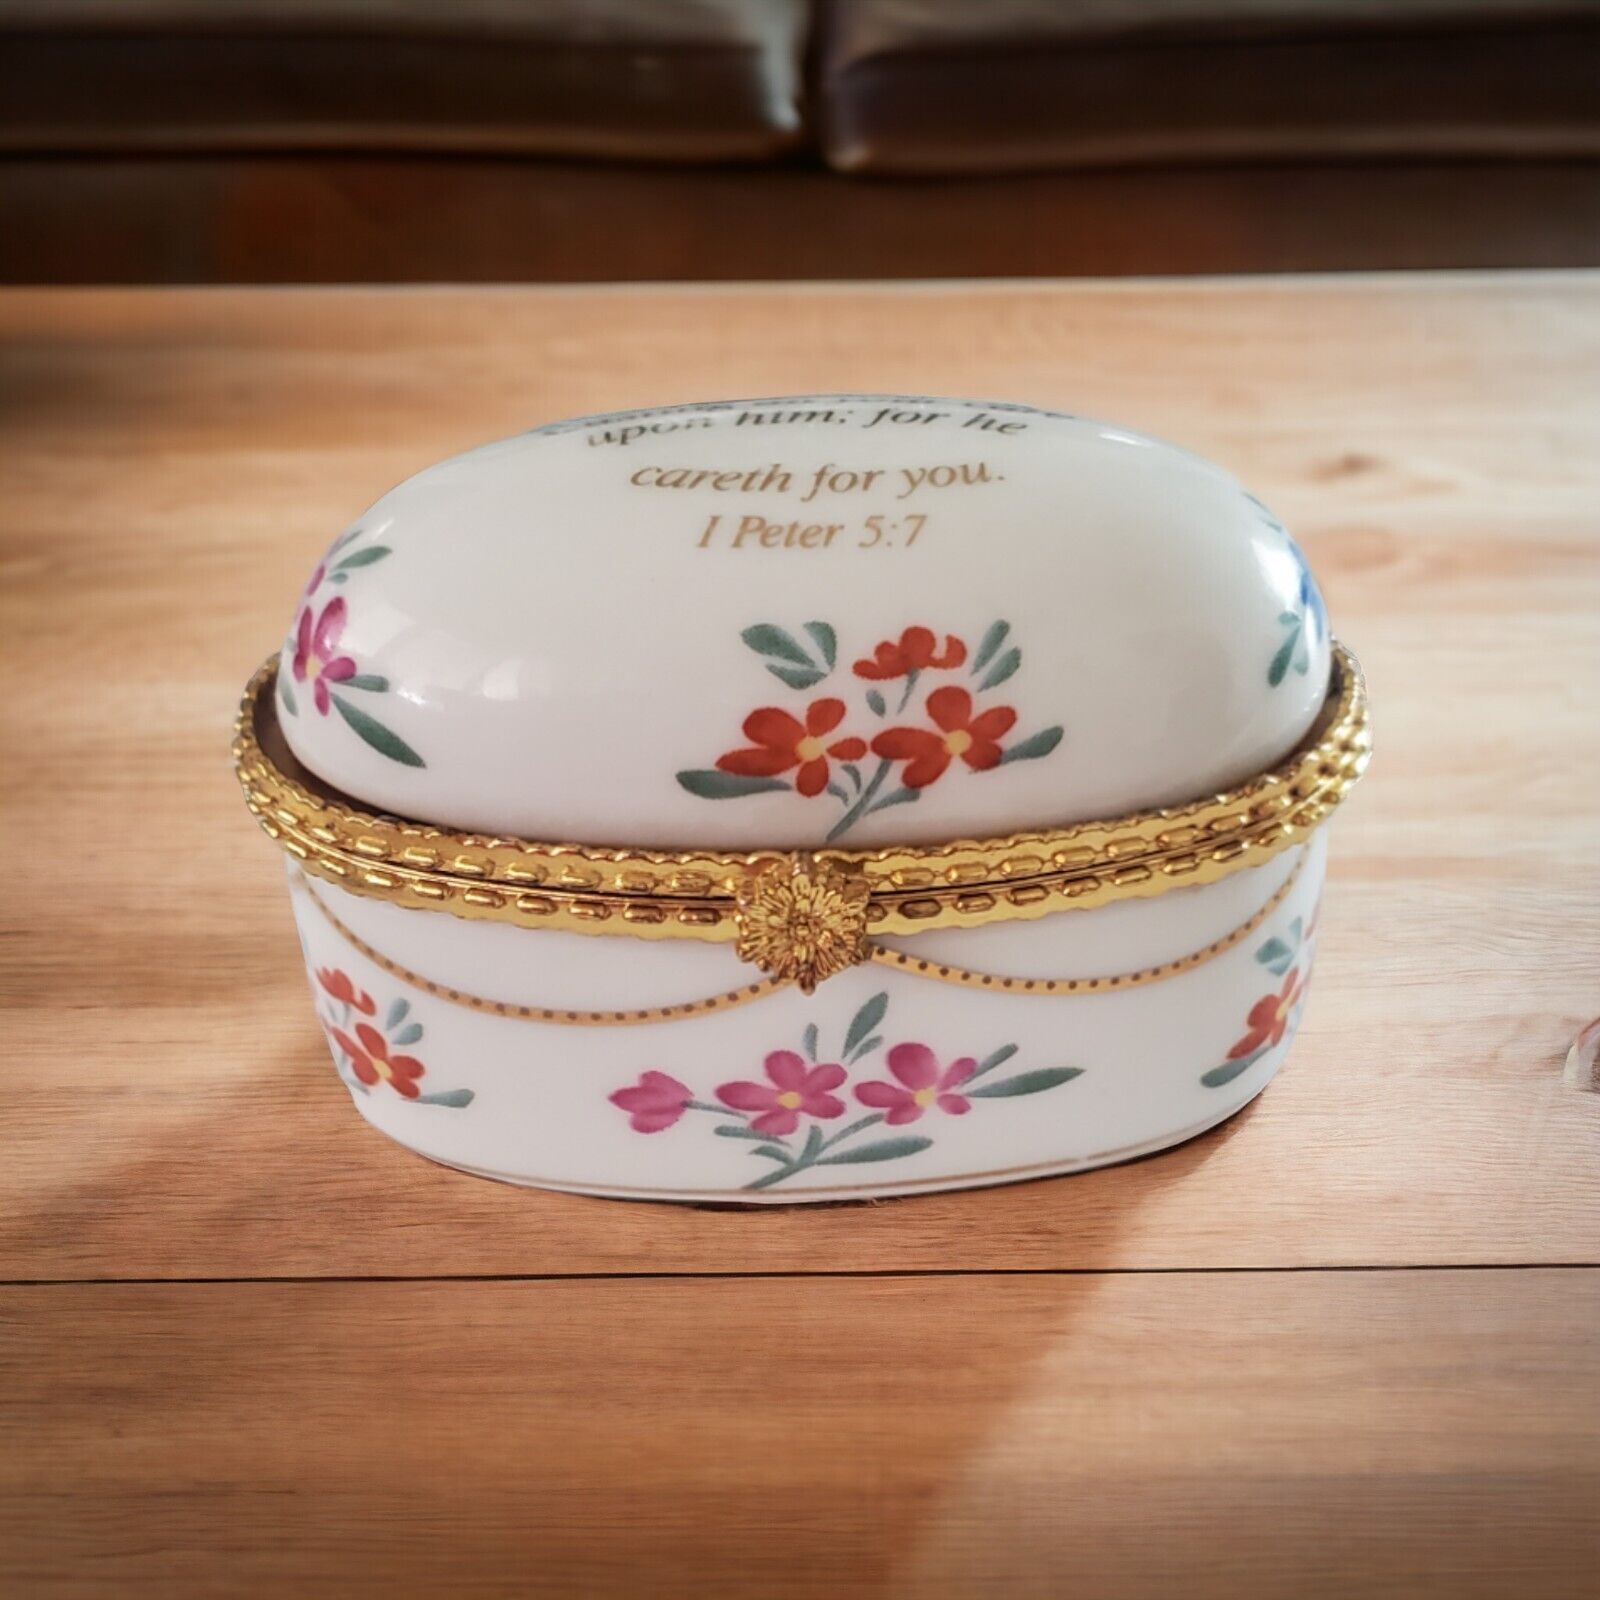 Imperial Porcelain Trinket Box Roses Oval Bible Verse 1 Peter 5:7